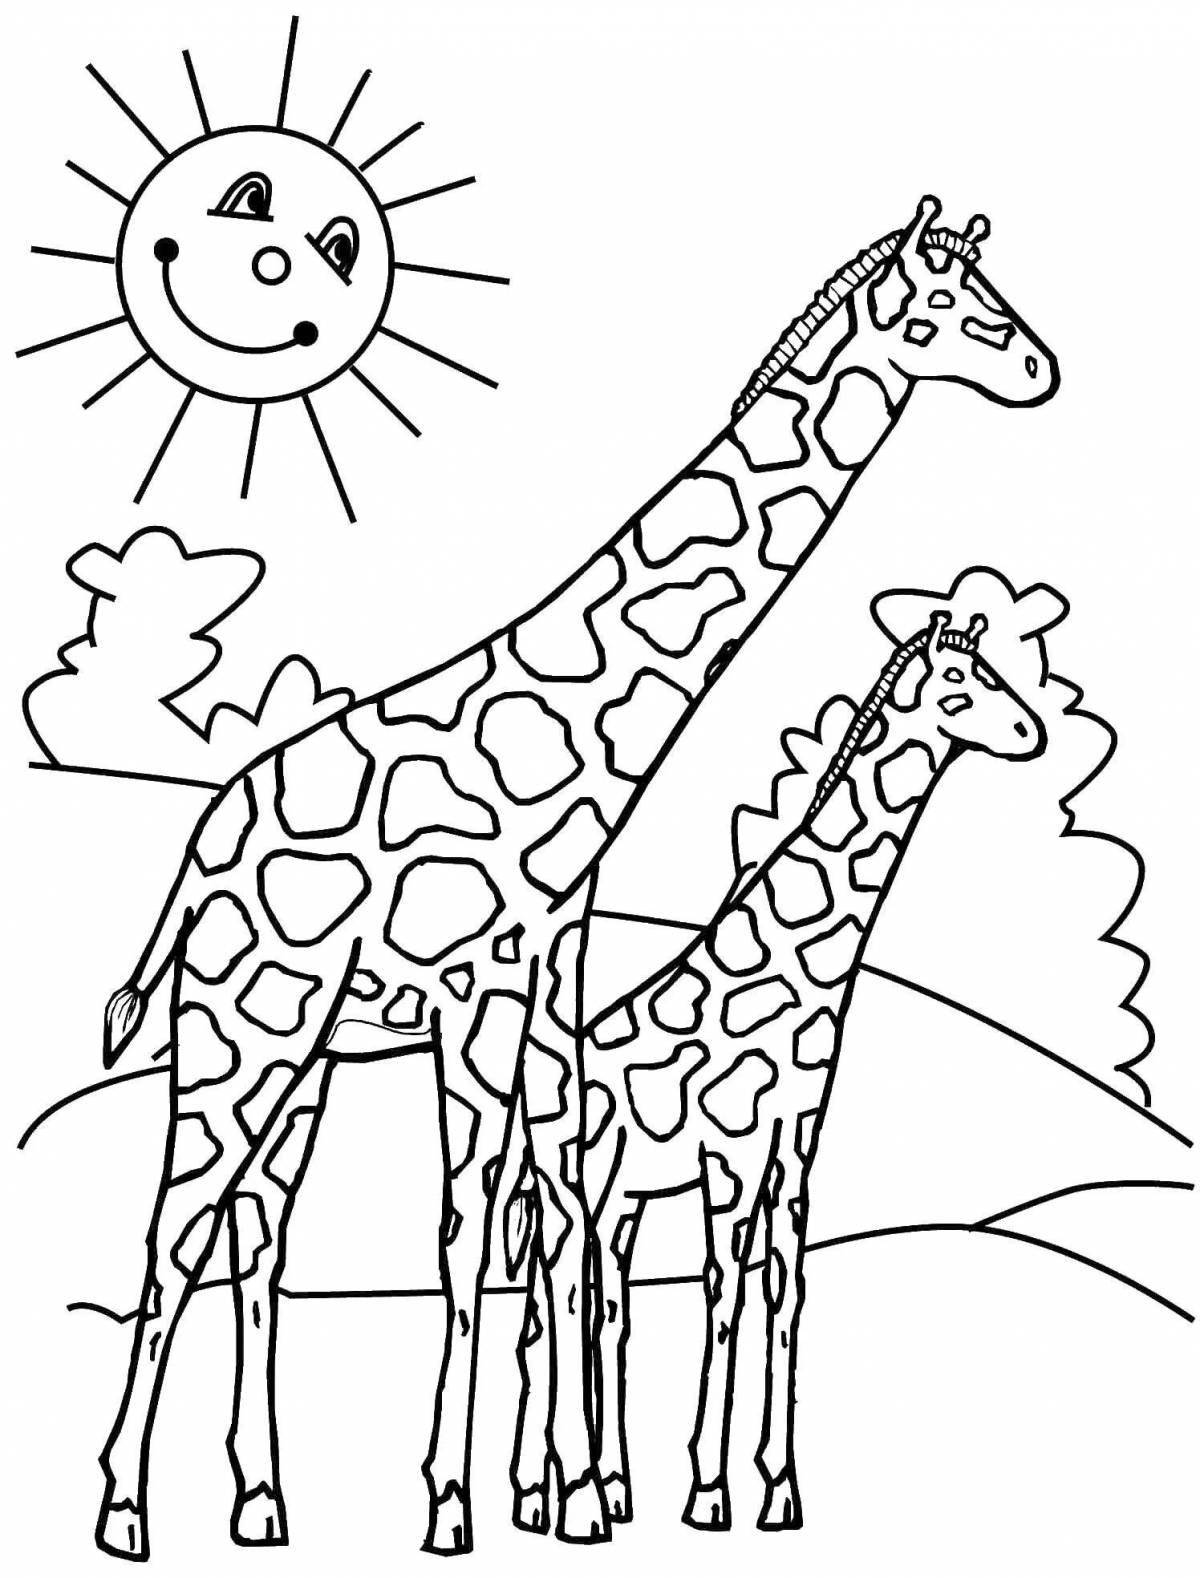 Fun African Animal Coloring Book for 4-5 year olds